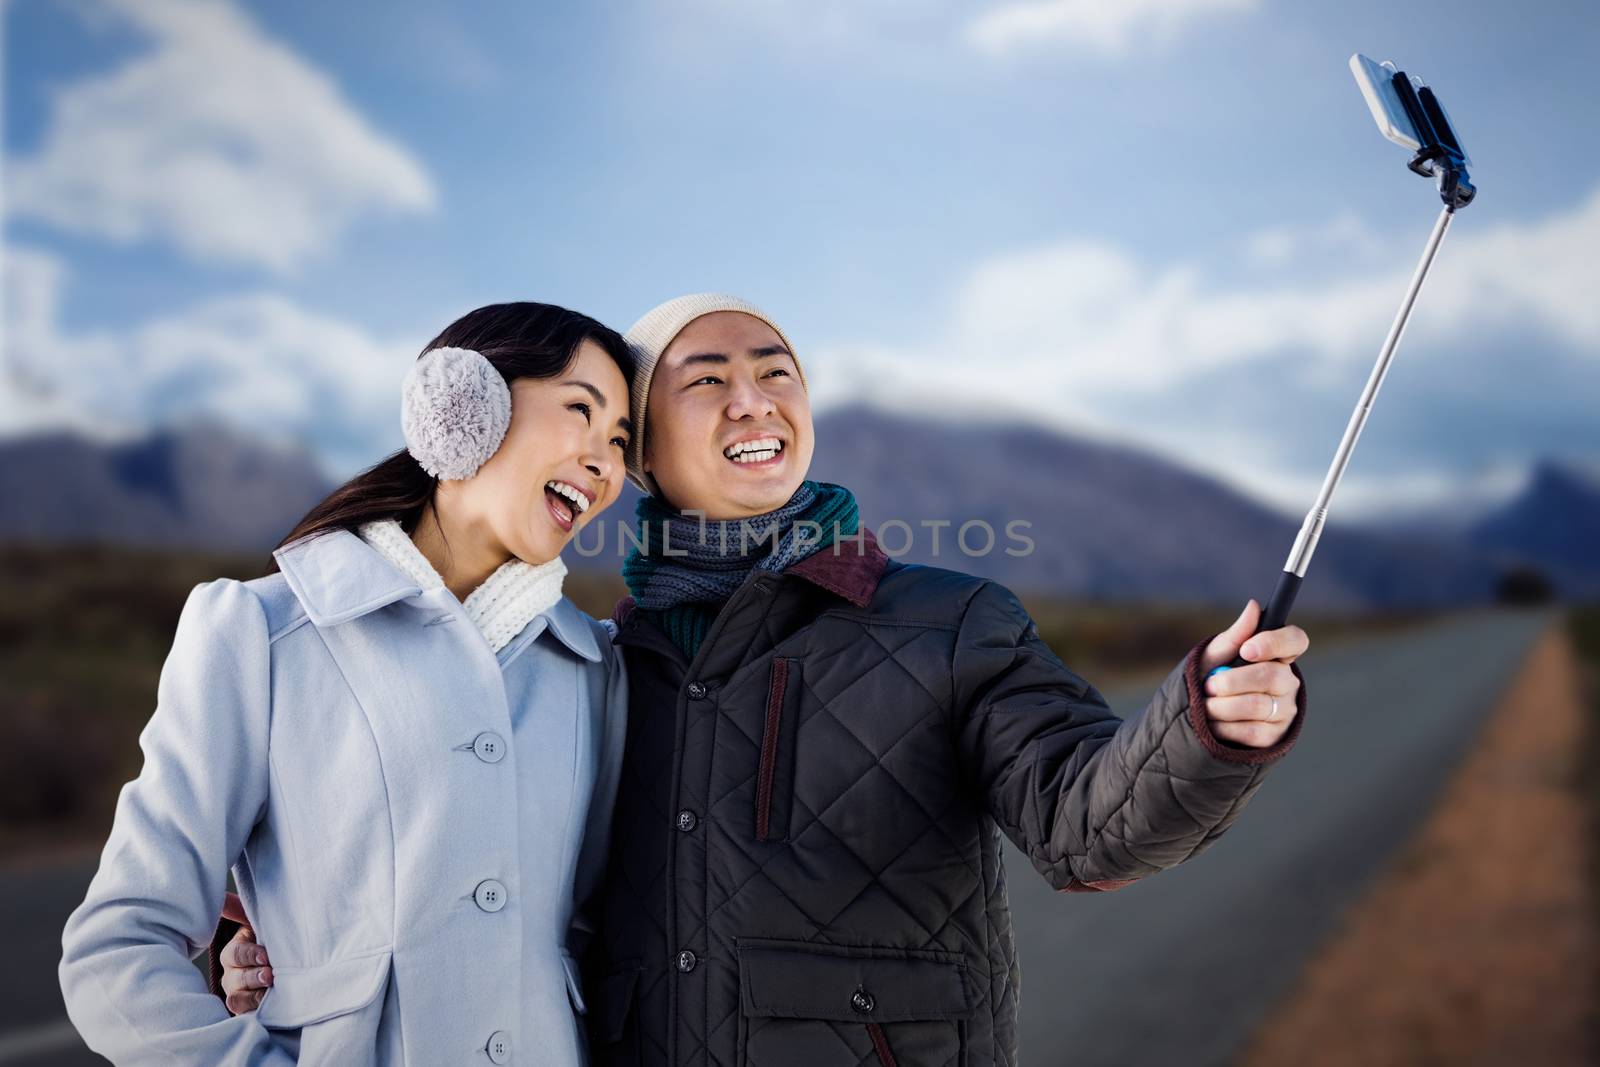 Composite image of couples taking funny pictures using smartphone by Wavebreakmedia